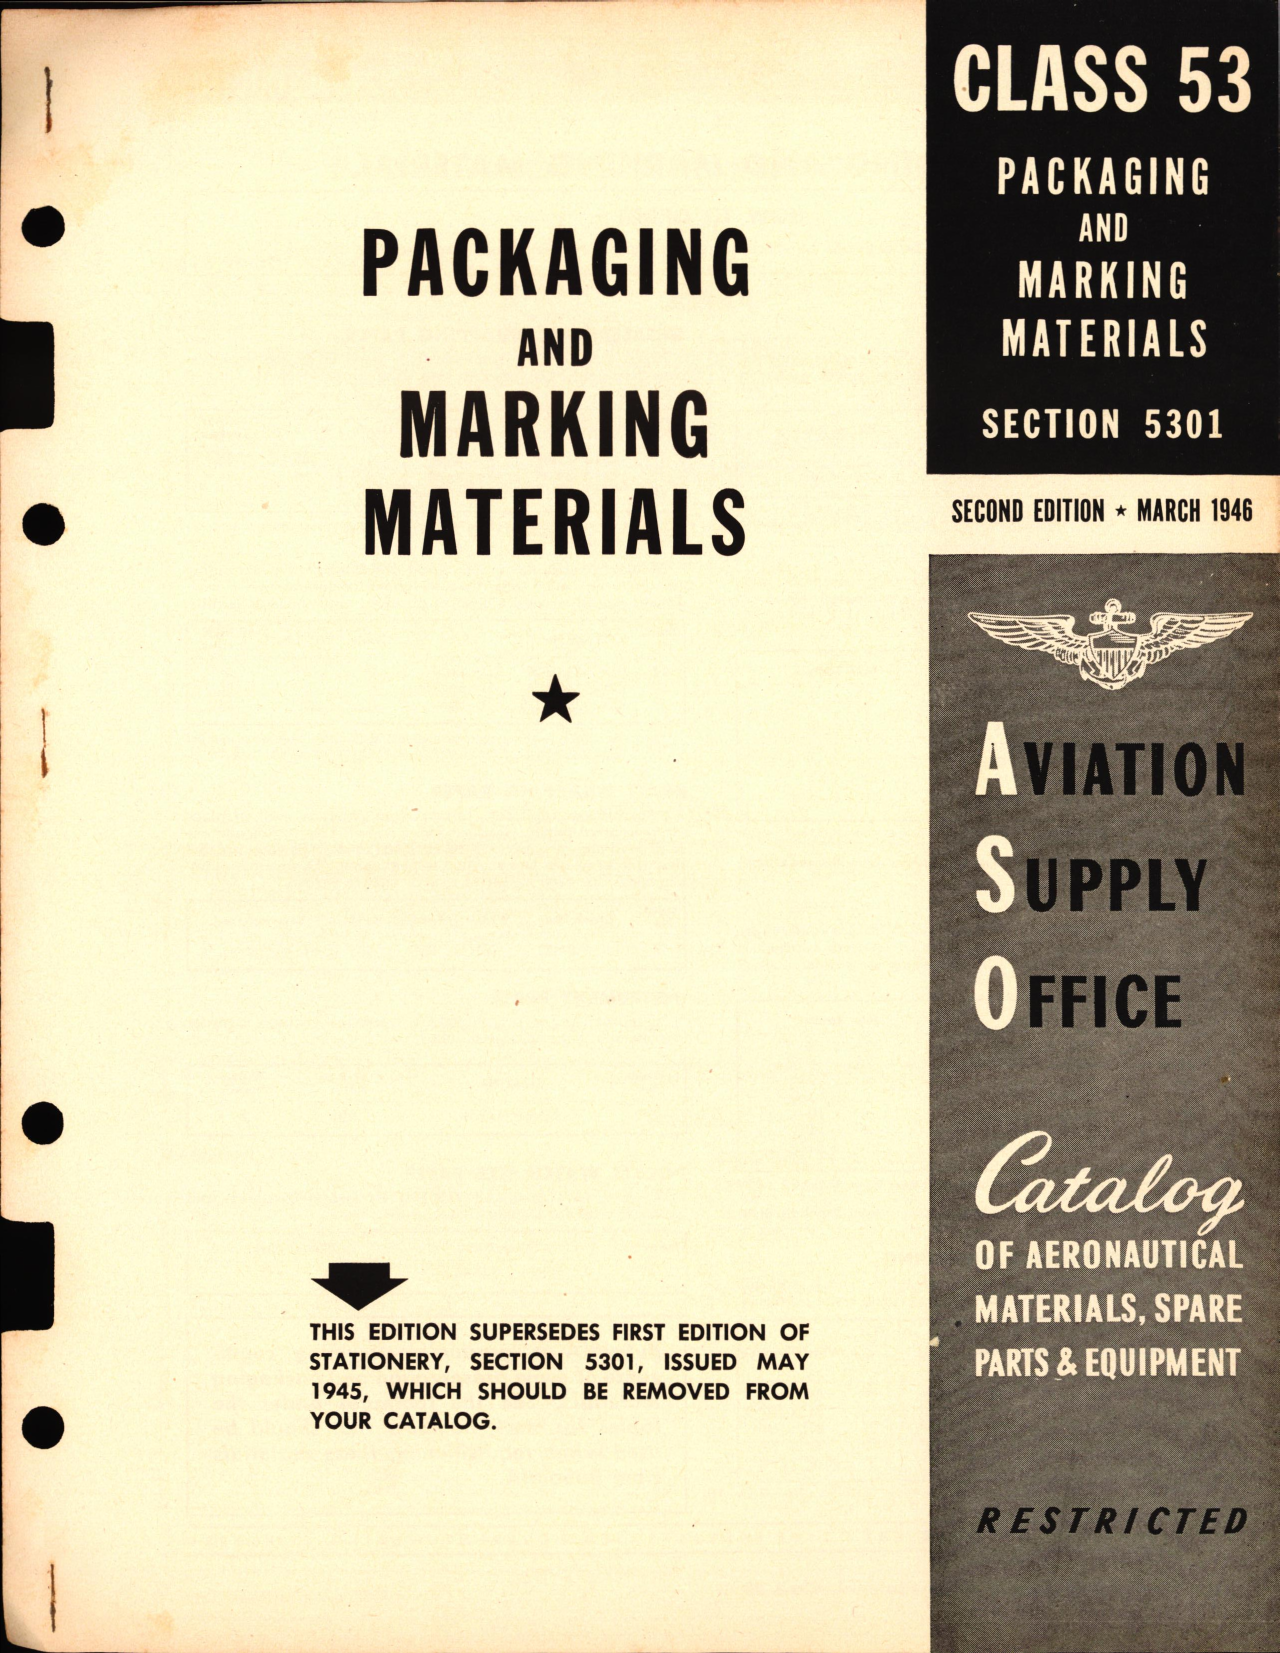 Sample page 1 from AirCorps Library document: Packaging and Marking Materials